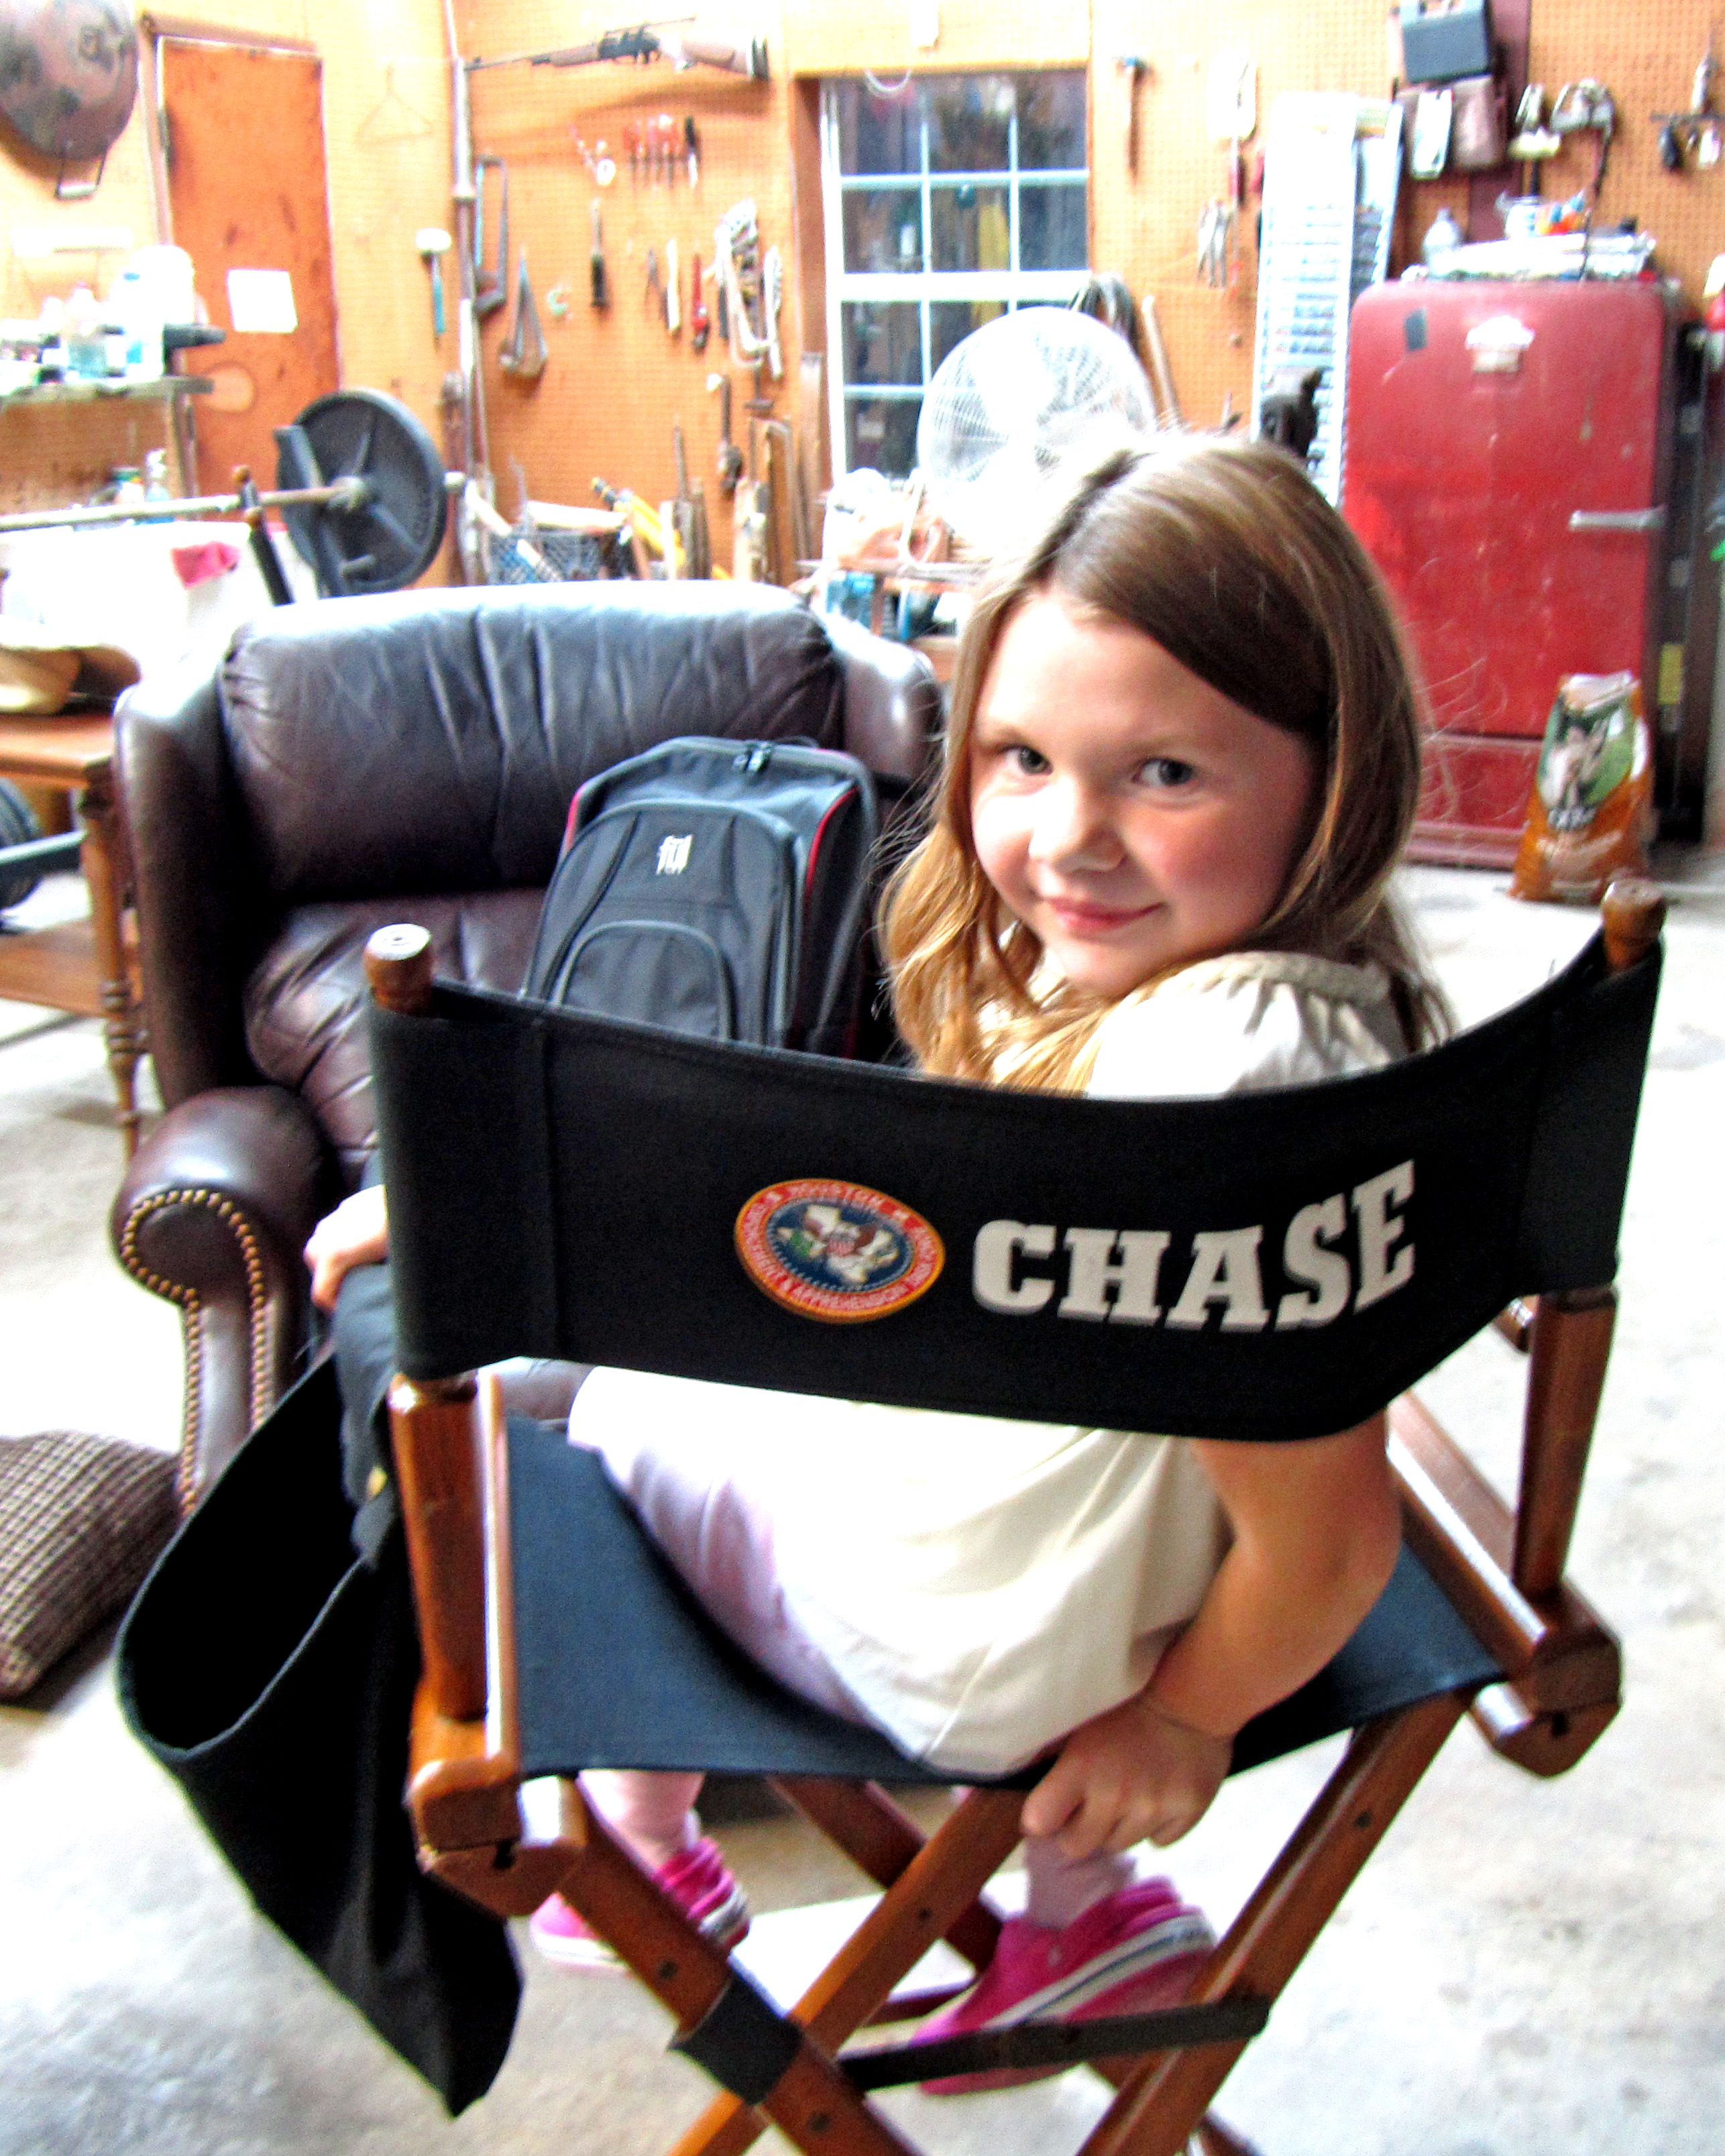 Bobbie in her guest lead role as Dakota Marie and Bella Thomason in Chase